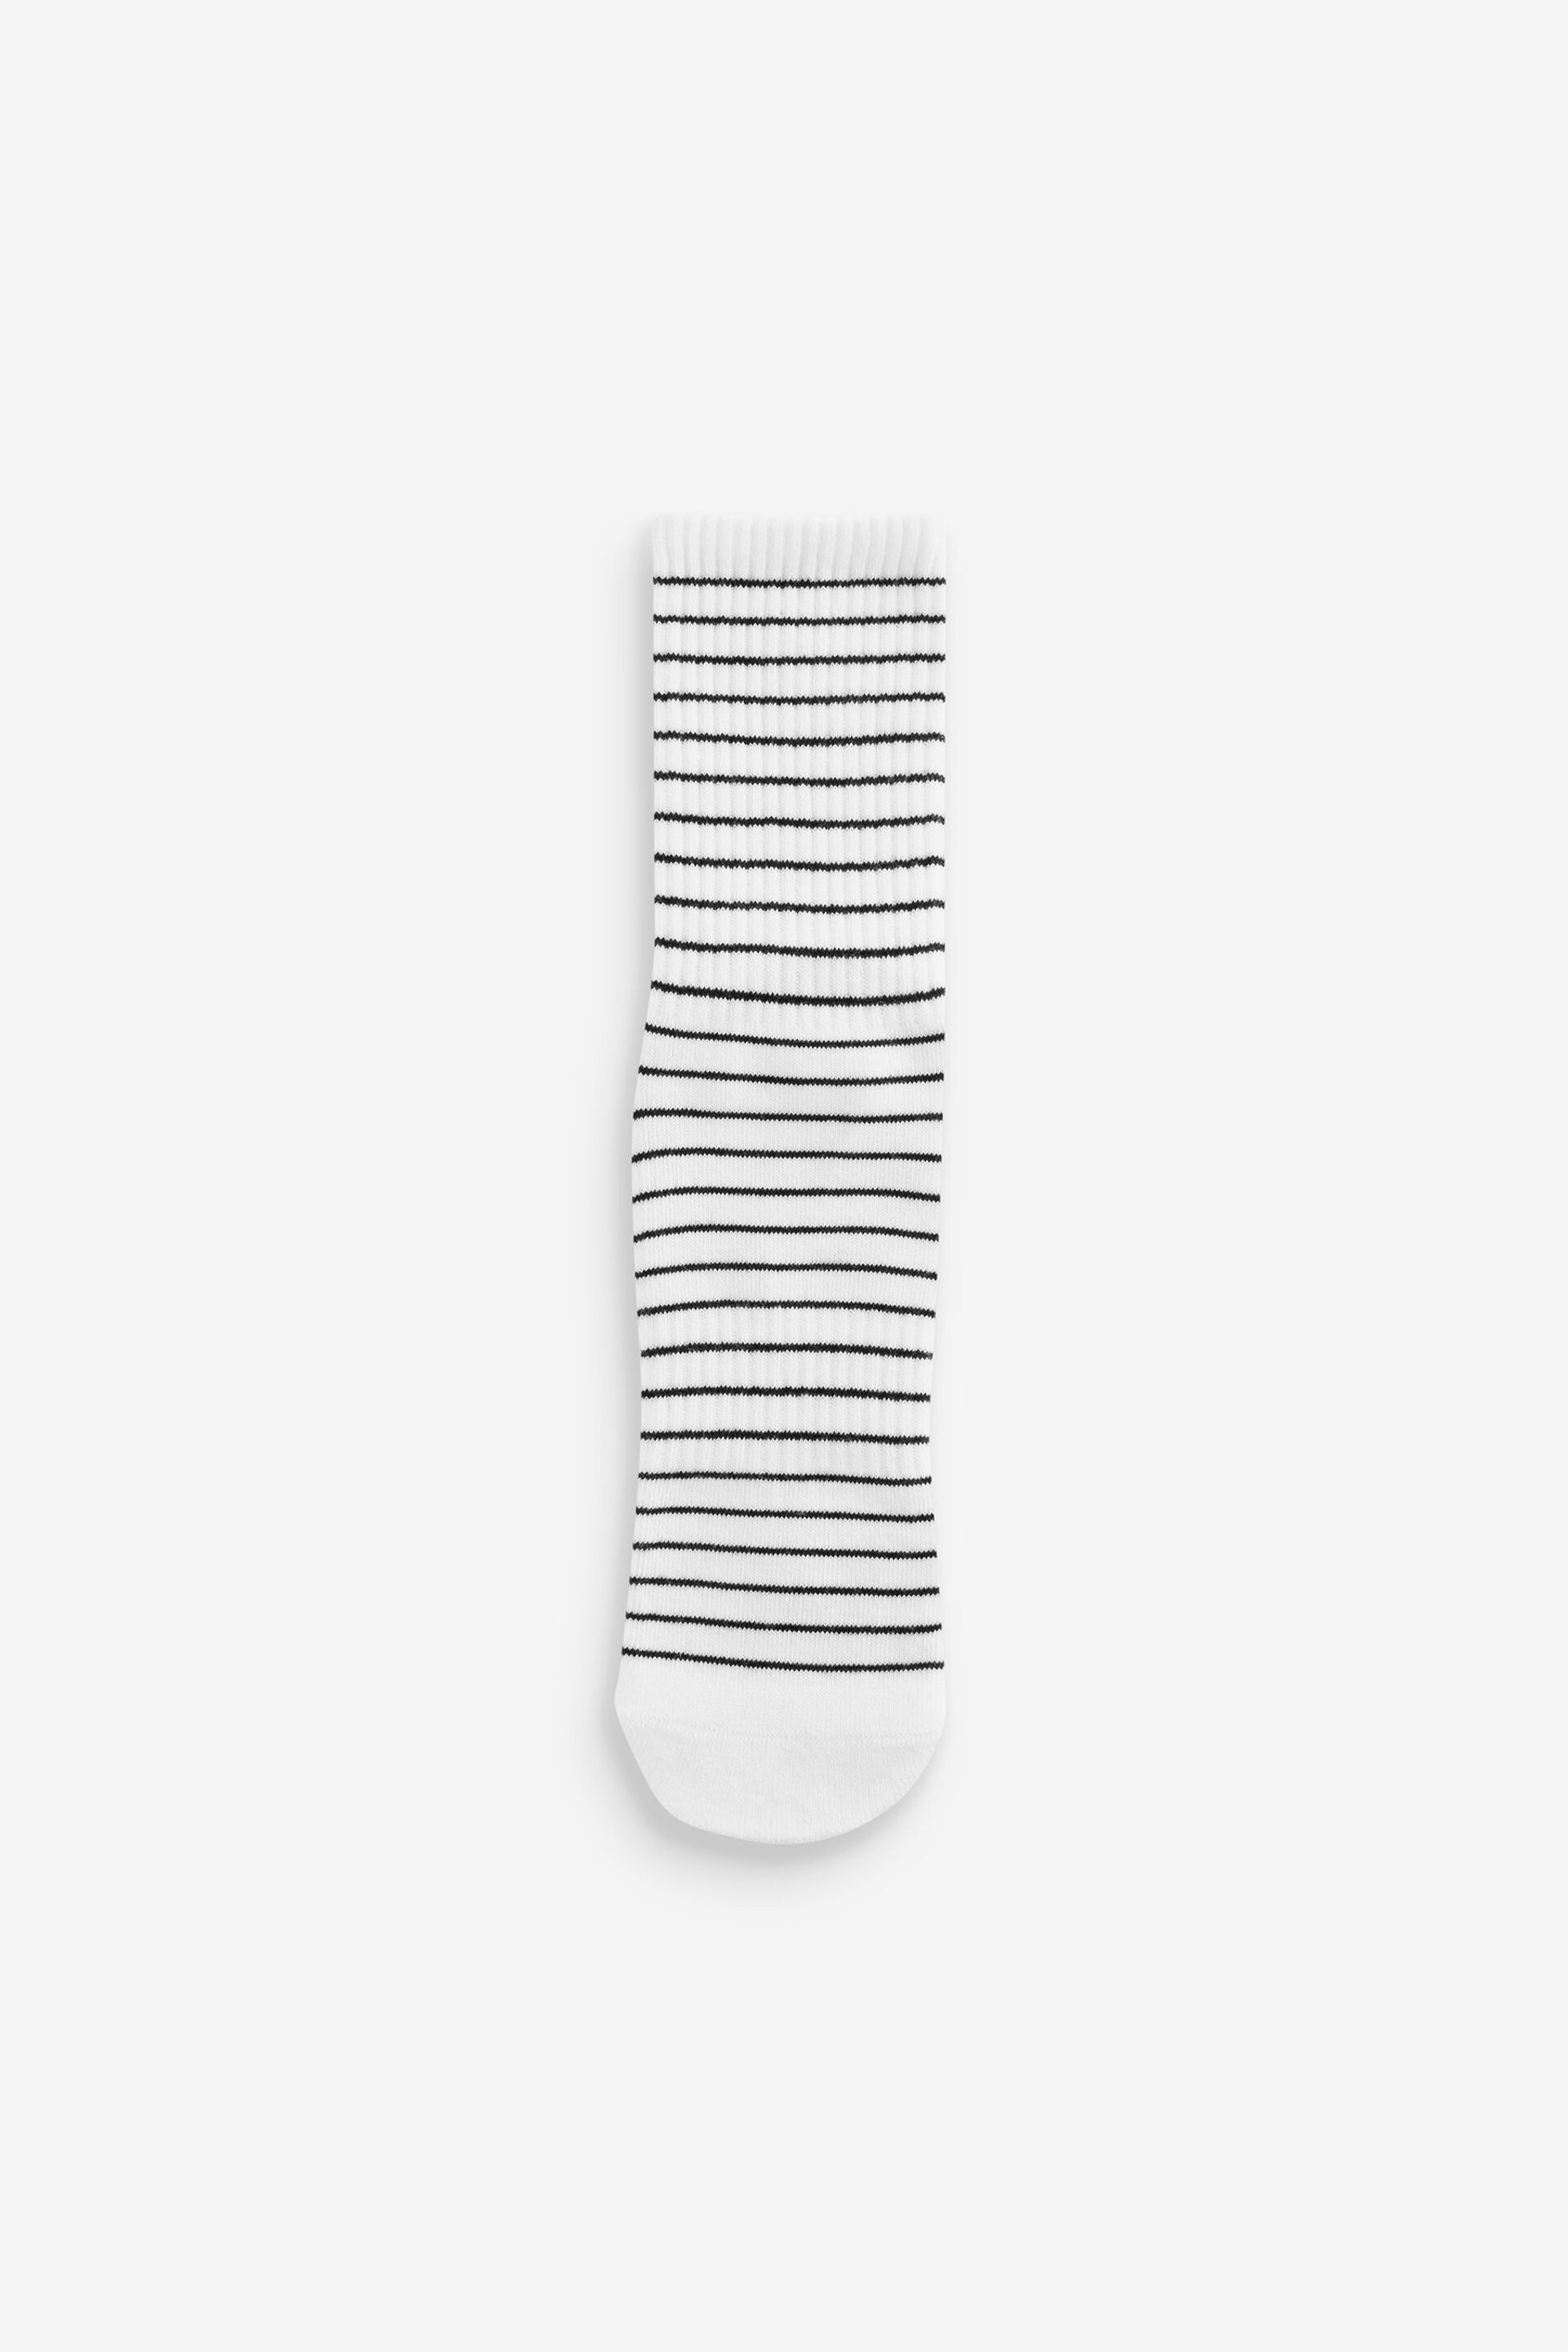 Black/White/Grey/Brown Stripe Cushion Sole Ribbed Ankle Socks With Arch Support 4 Pack - Image 5 of 5